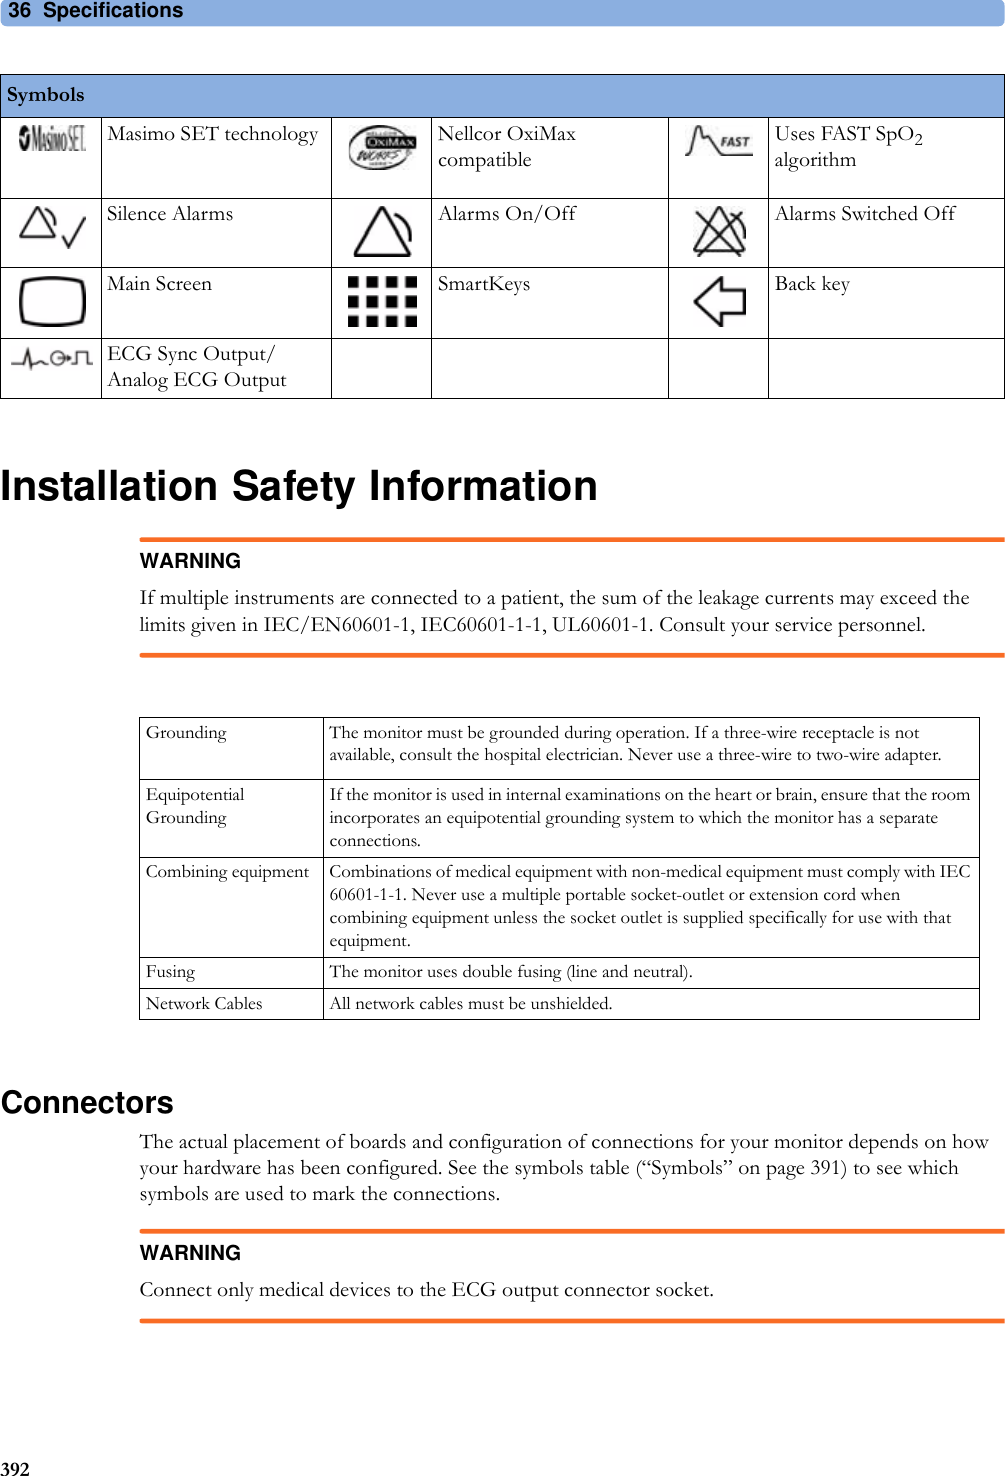 36 Specifications392Installation Safety InformationWARNINGIf multiple instruments are connected to a patient, the sum of the leakage currents may exceed the limits given in IEC/EN60601-1, IEC60601-1-1, UL60601-1. Consult your service personnel.ConnectorsThe actual placement of boards and configuration of connections for your monitor depends on how your hardware has been configured. See the symbols table (“Symbols” on page 391) to see which symbols are used to mark the connections.WARNINGConnect only medical devices to the ECG output connector socket.Masimo SET technology Nellcor OxiMax compatibleUses FAST SpO2 algorithmSilence Alarms Alarms On/Off Alarms Switched OffMain Screen SmartKeys Back keyECG Sync Output/Analog ECG Output SymbolsGrounding The monitor must be grounded during operation. If a three-wire receptacle is not available, consult the hospital electrician. Never use a three-wire to two-wire adapter.Equipotential GroundingIf the monitor is used in internal examinations on the heart or brain, ensure that the room incorporates an equipotential grounding system to which the monitor has a separate connections.Combining equipment Combinations of medical equipment with non-medical equipment must comply with IEC 60601-1-1. Never use a multiple portable socket-outlet or extension cord when combining equipment unless the socket outlet is supplied specifically for use with that equipment.Fusing The monitor uses double fusing (line and neutral).Network Cables All network cables must be unshielded.